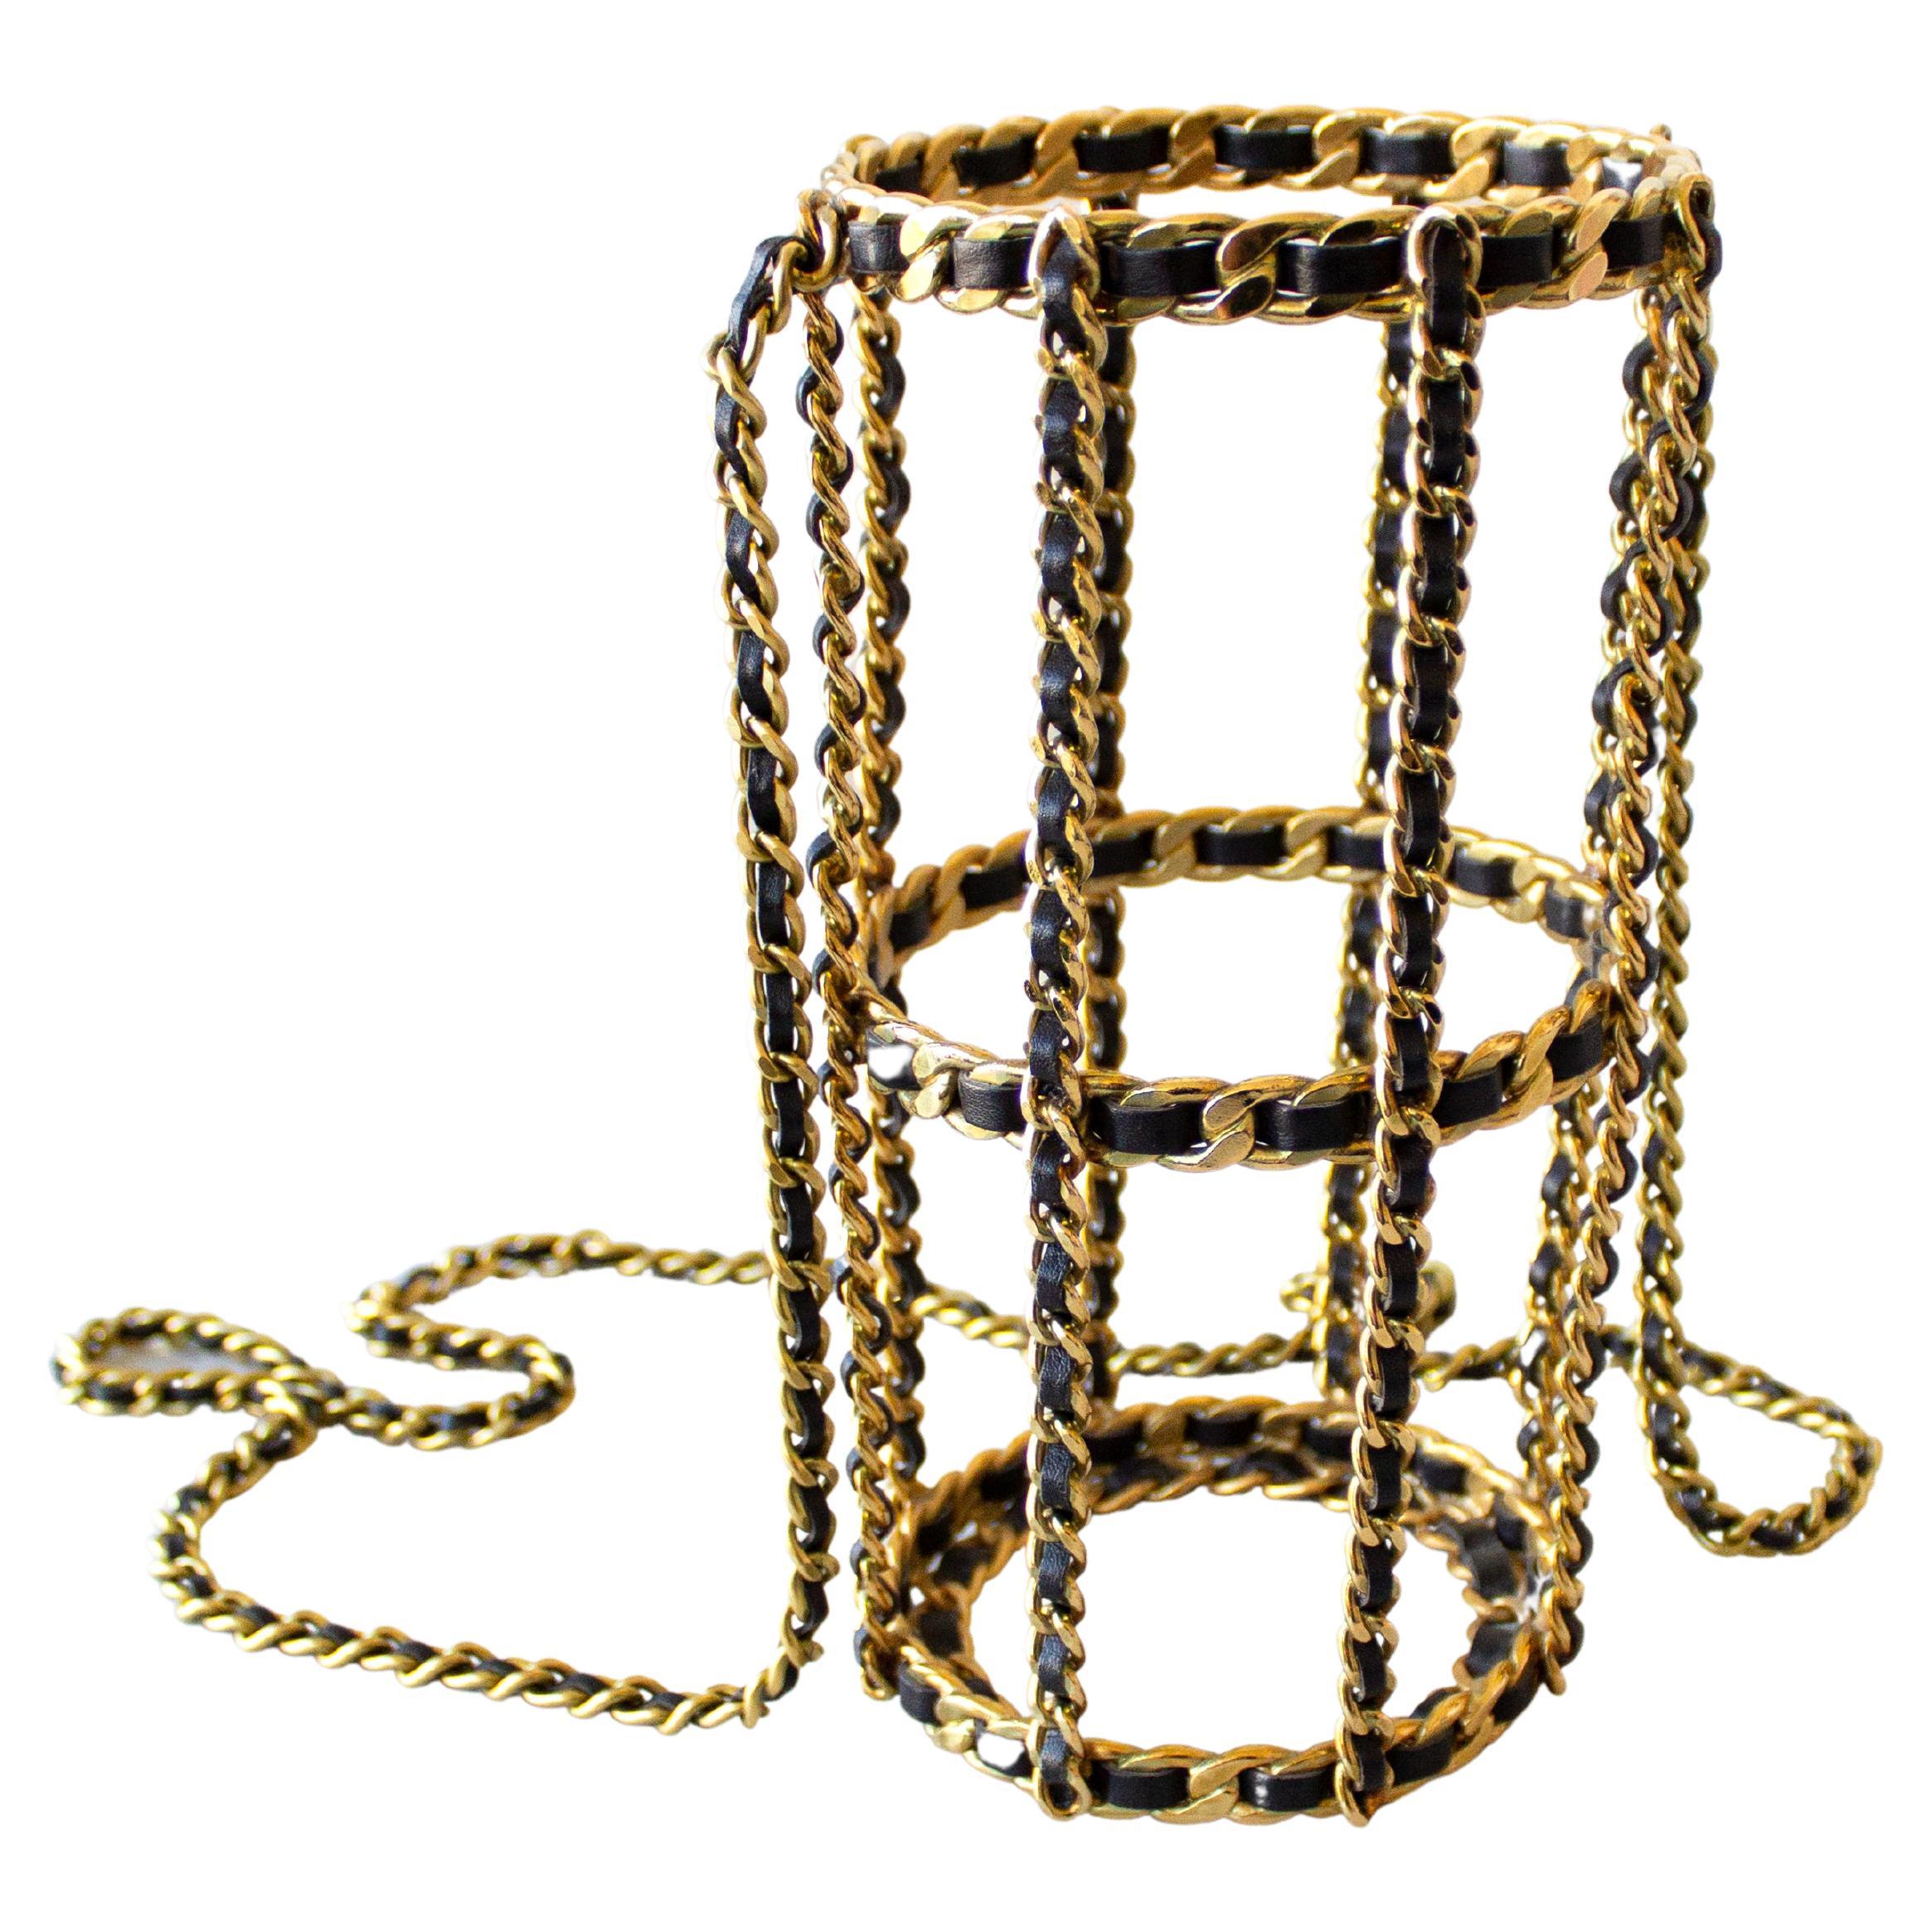 Iconic Chanel Vintage Fall 1994 Gold Metal Chain Black 94A Water Bottle Holder